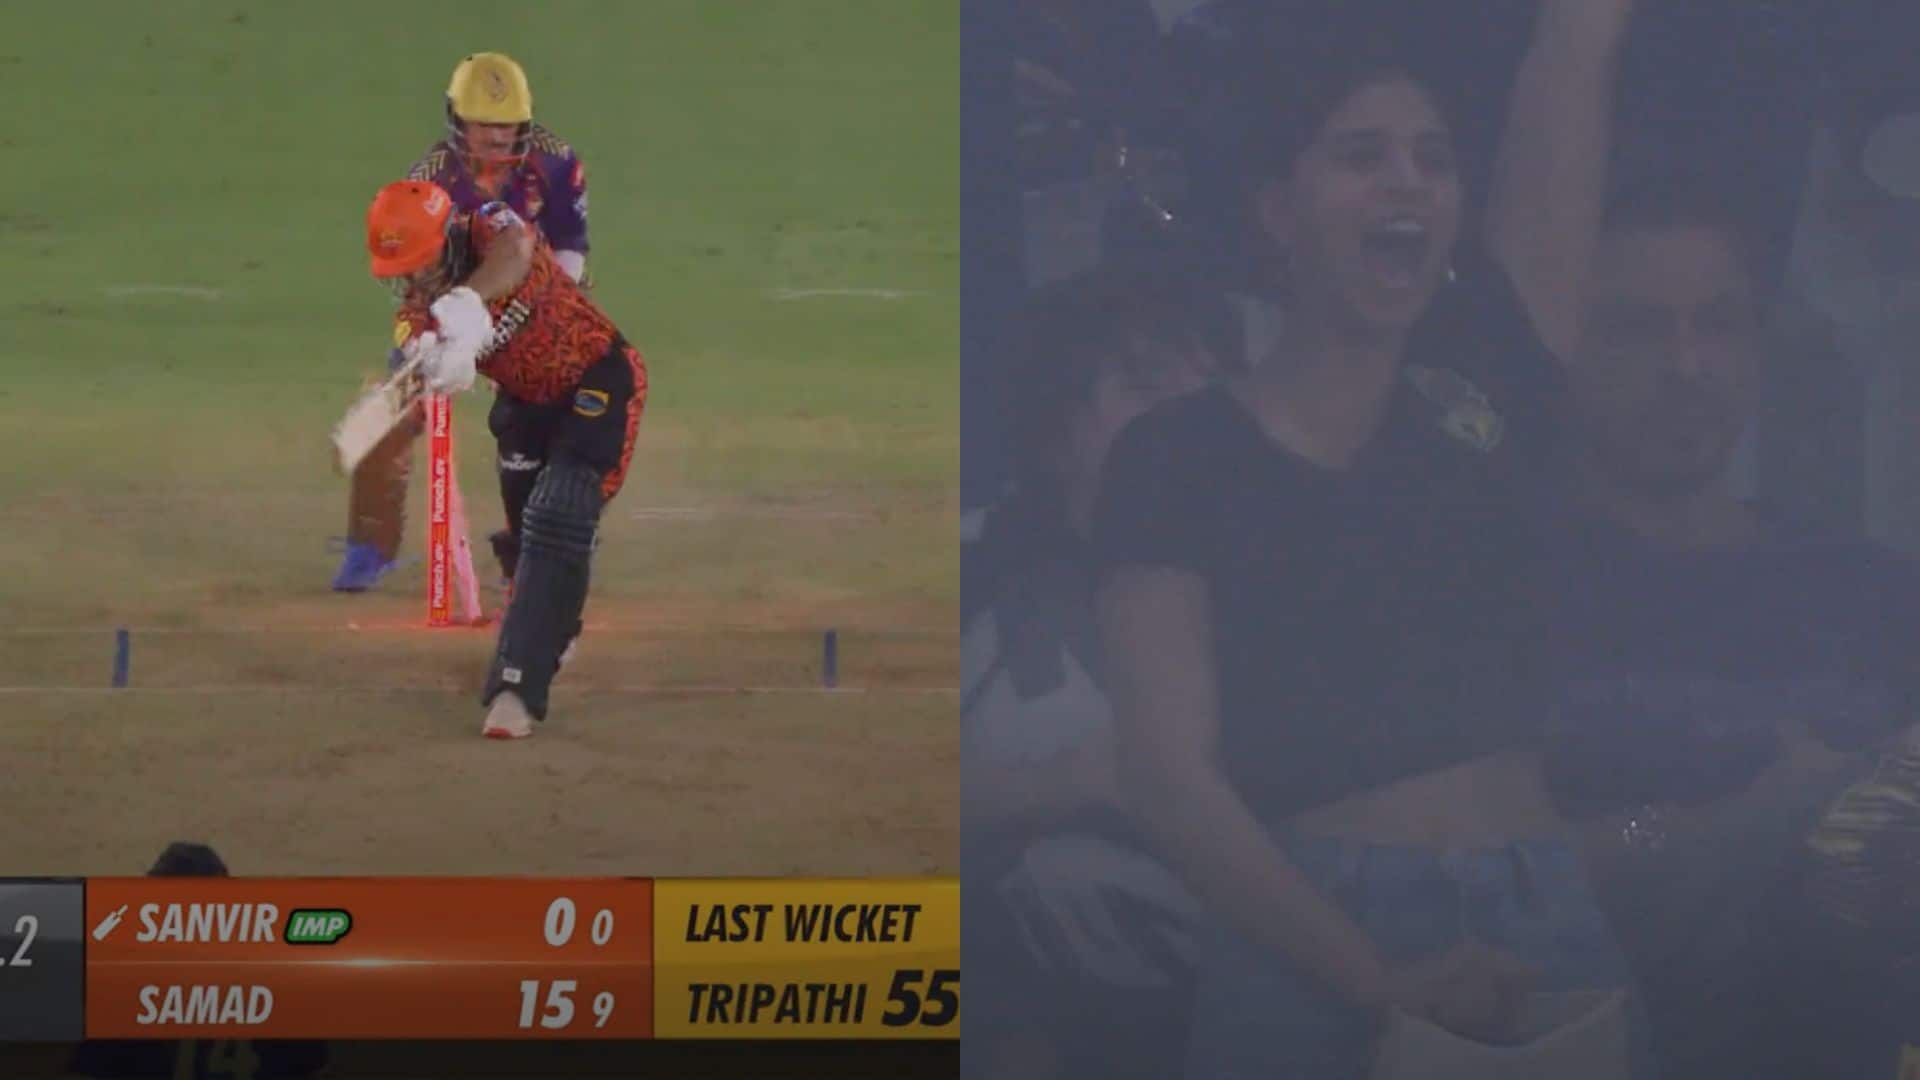 Suhana was pumped up after the dismissal [X.com]